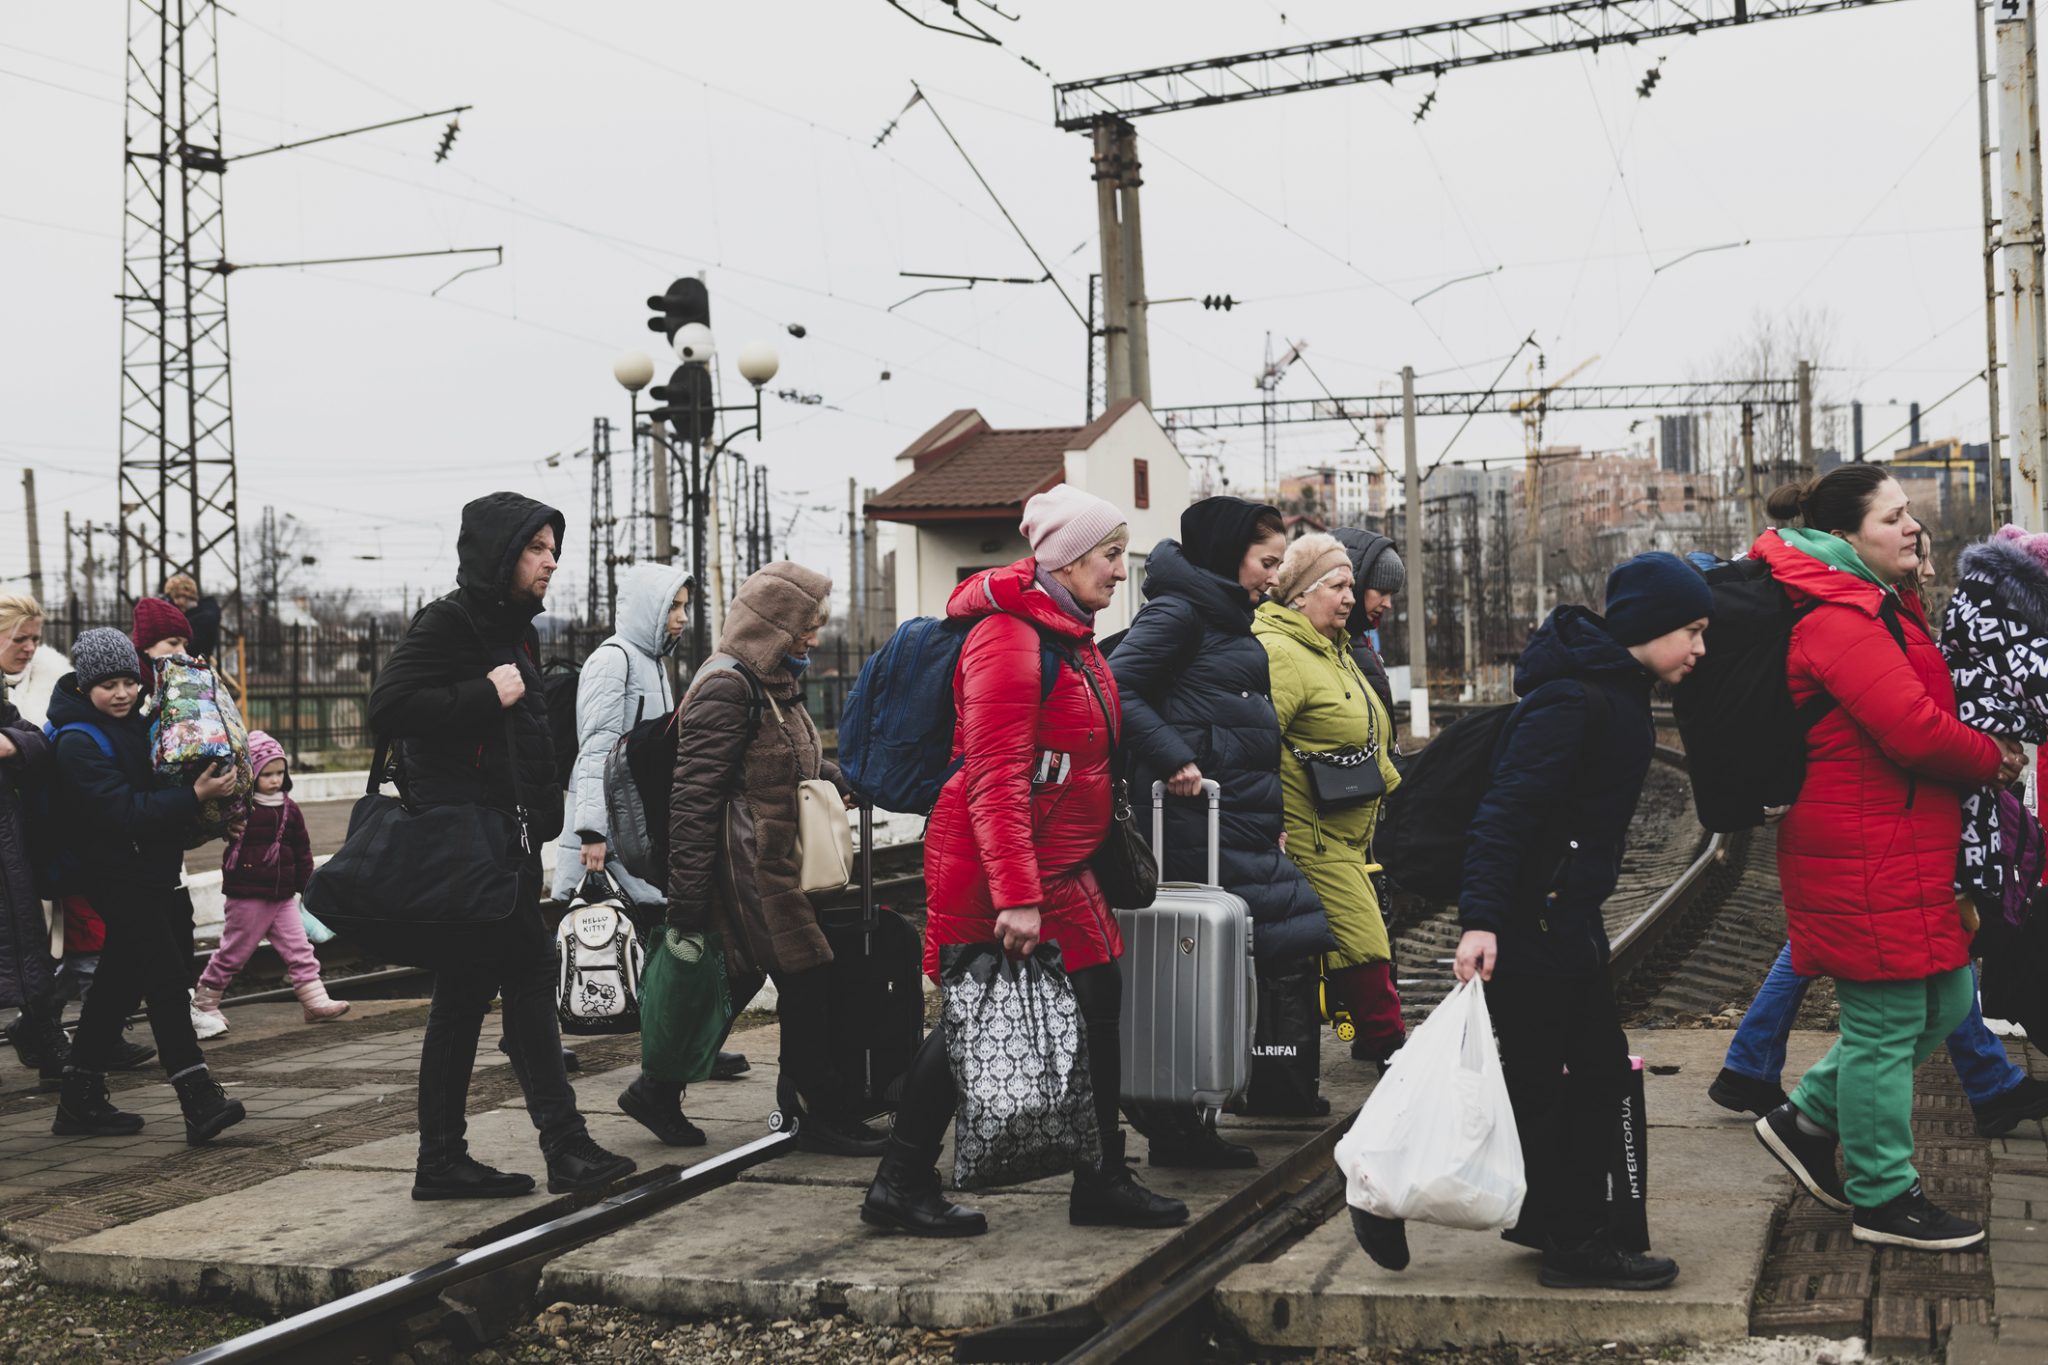 Lviv, Ukraine - March 3, 2022: Having just disembarked a train, people walk with their luggage across the tracks in Lviv.